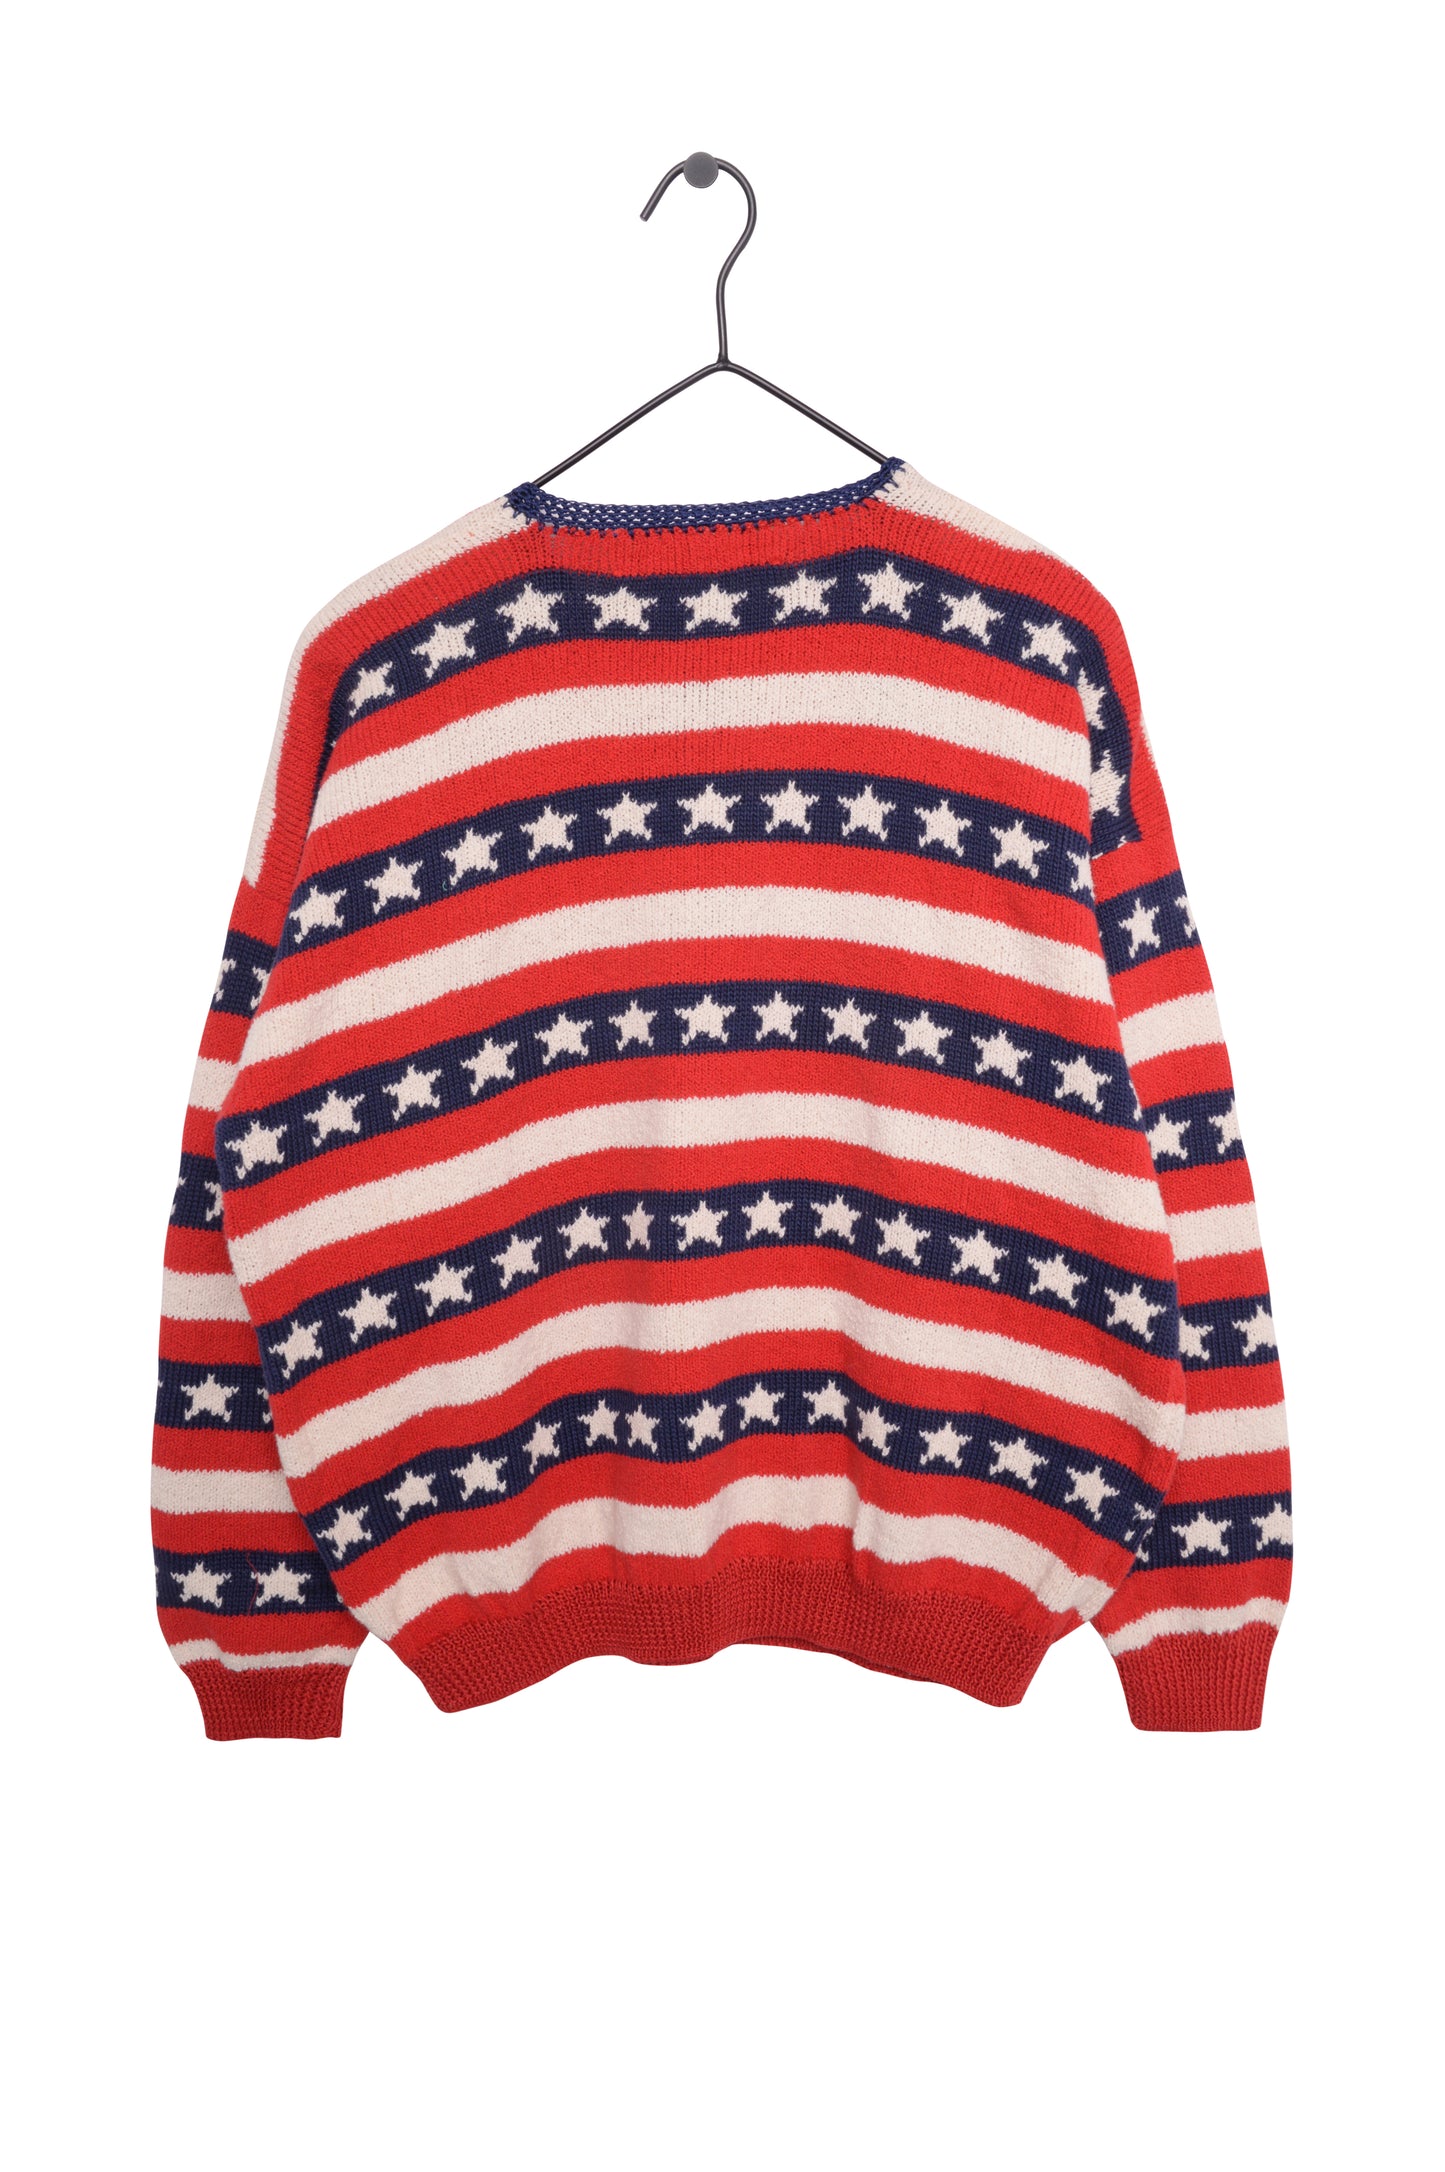 Stars and Stripes Sweater